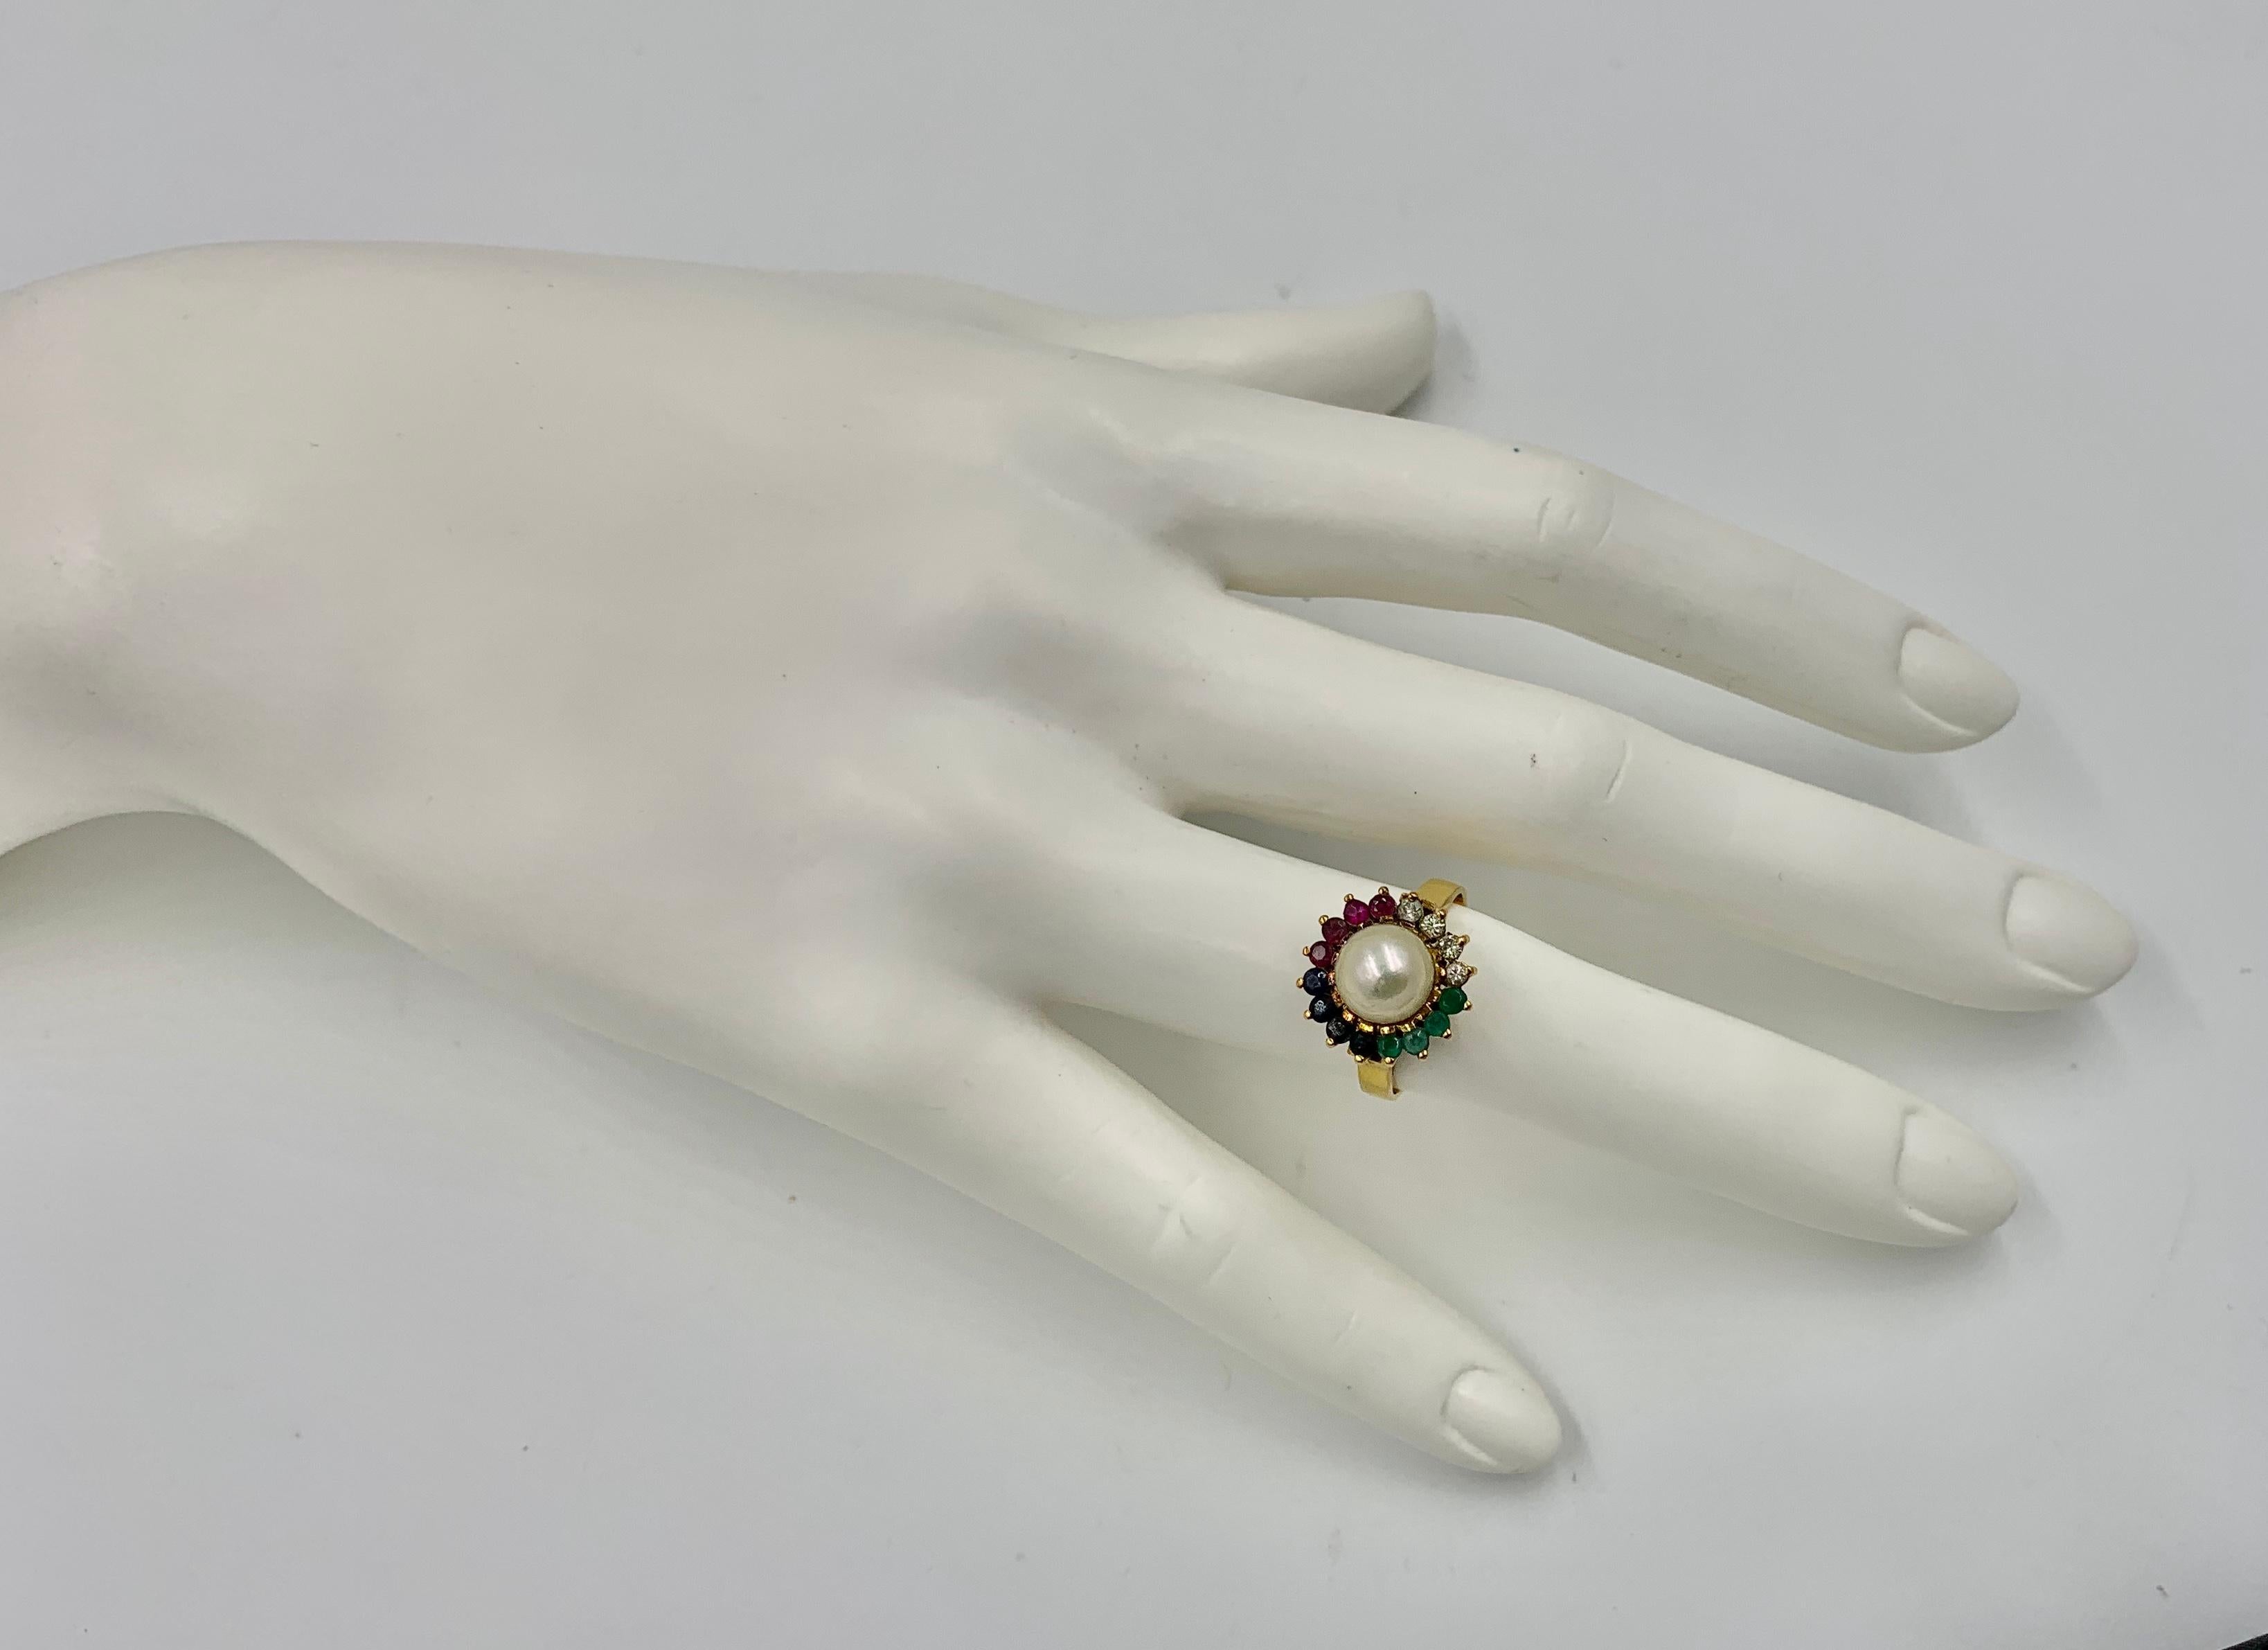 A stunning Multi Gem Ring with Emerald, Sapphire, Ruby, and Diamond gems surrounding a luscious white Pearl.  The ring has four Emeralds, Rubies, Sapphires and Diamonds surrounding the 8mm pearl.  I love the radiant colors of all the gems - so